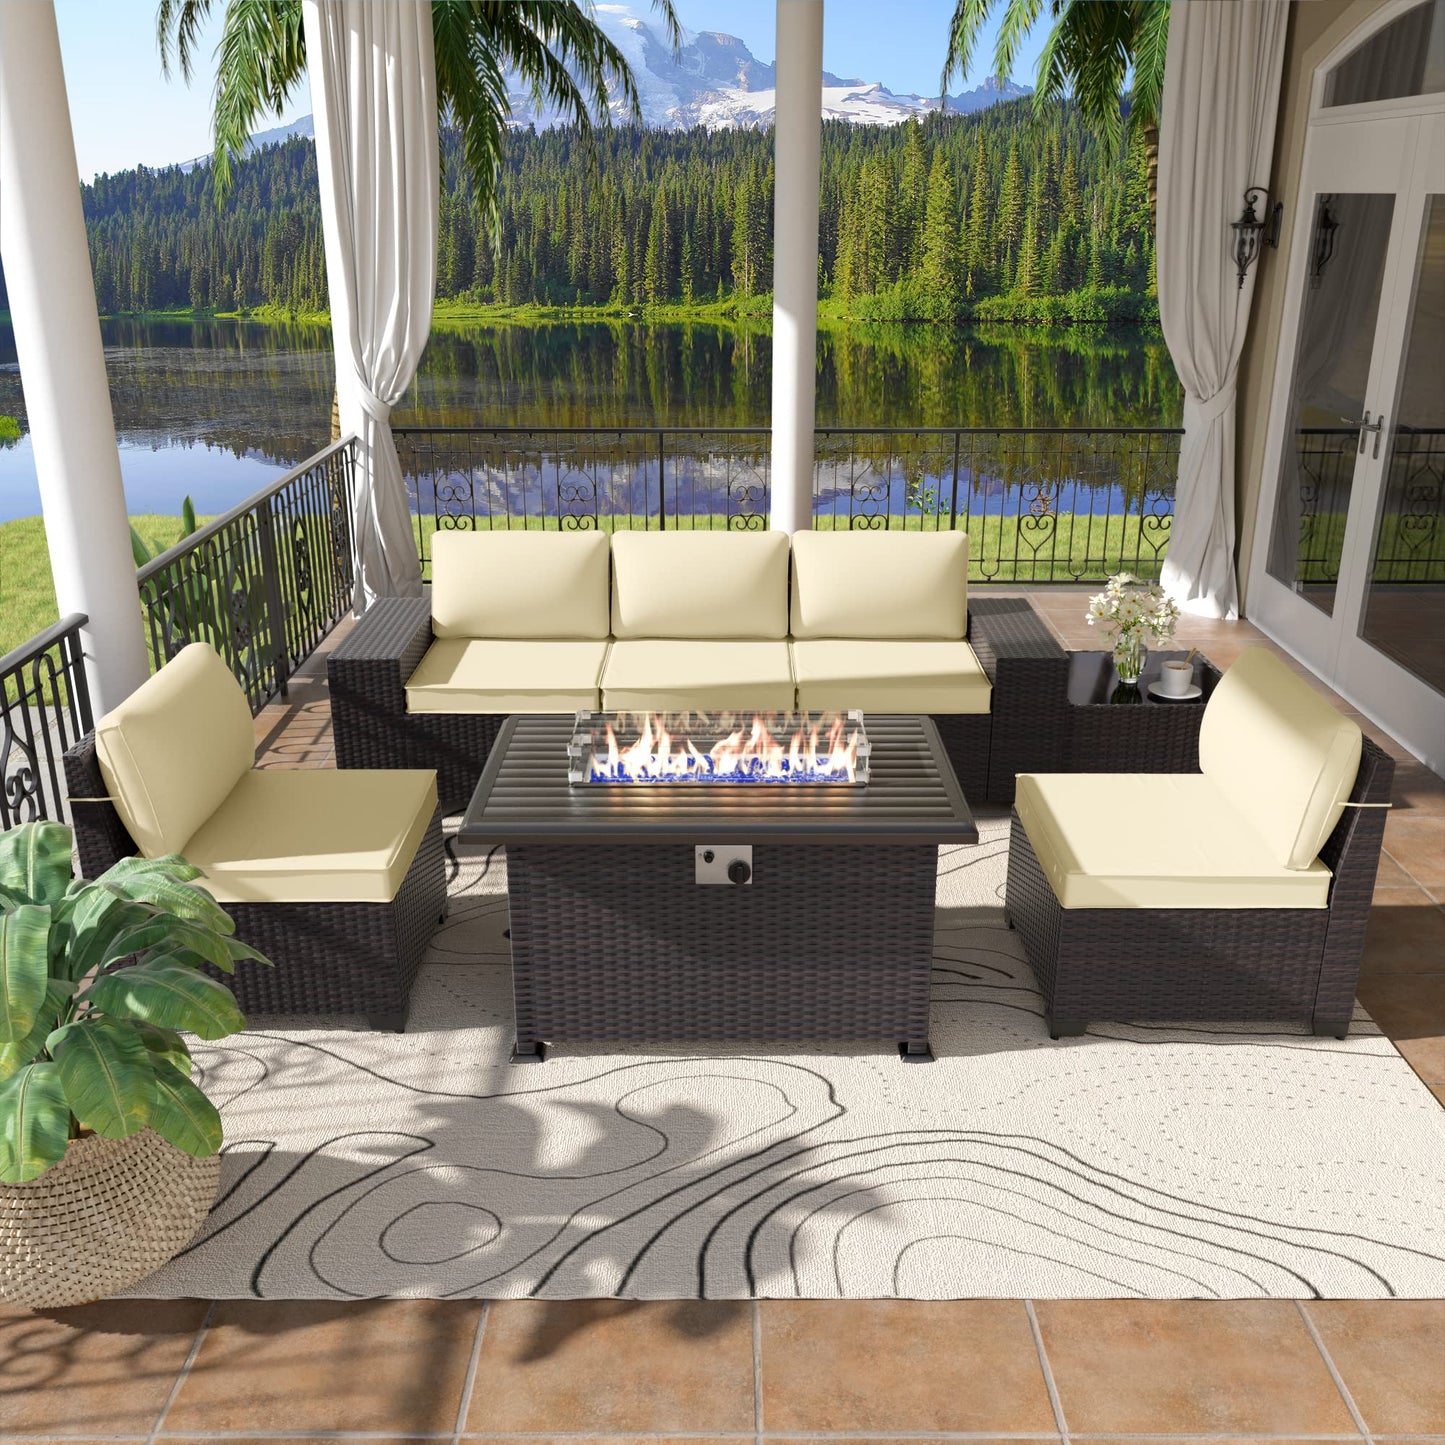 ALAULM 7 Pieces Outdoor Patio Furniture Set with Propane Fire Pit Table Patio Sectional Sofa Sets - Cream